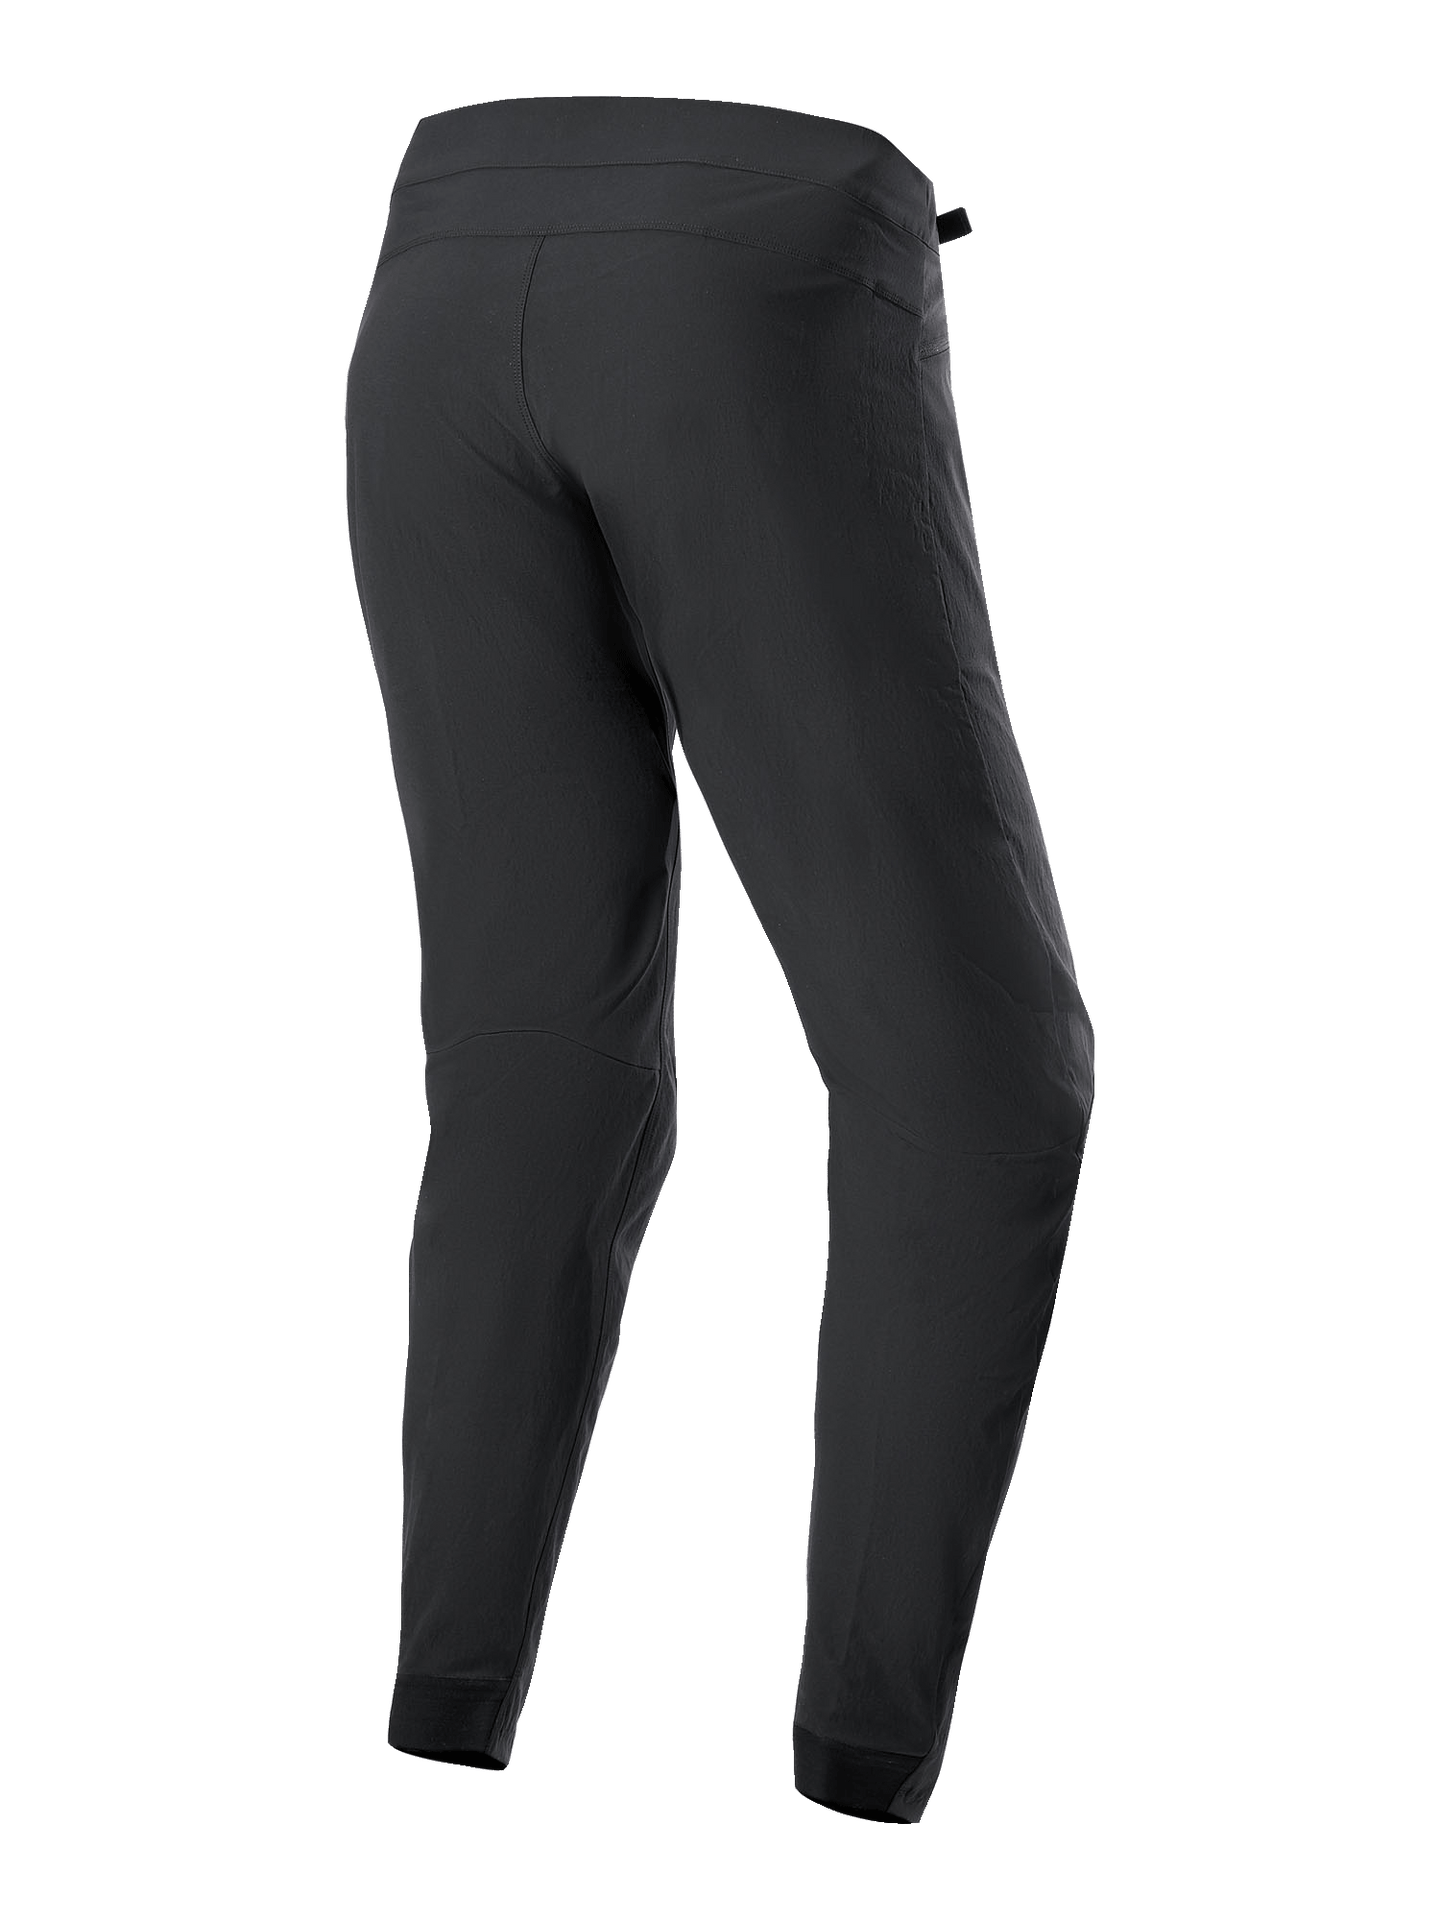 Youth A-Dura Pants